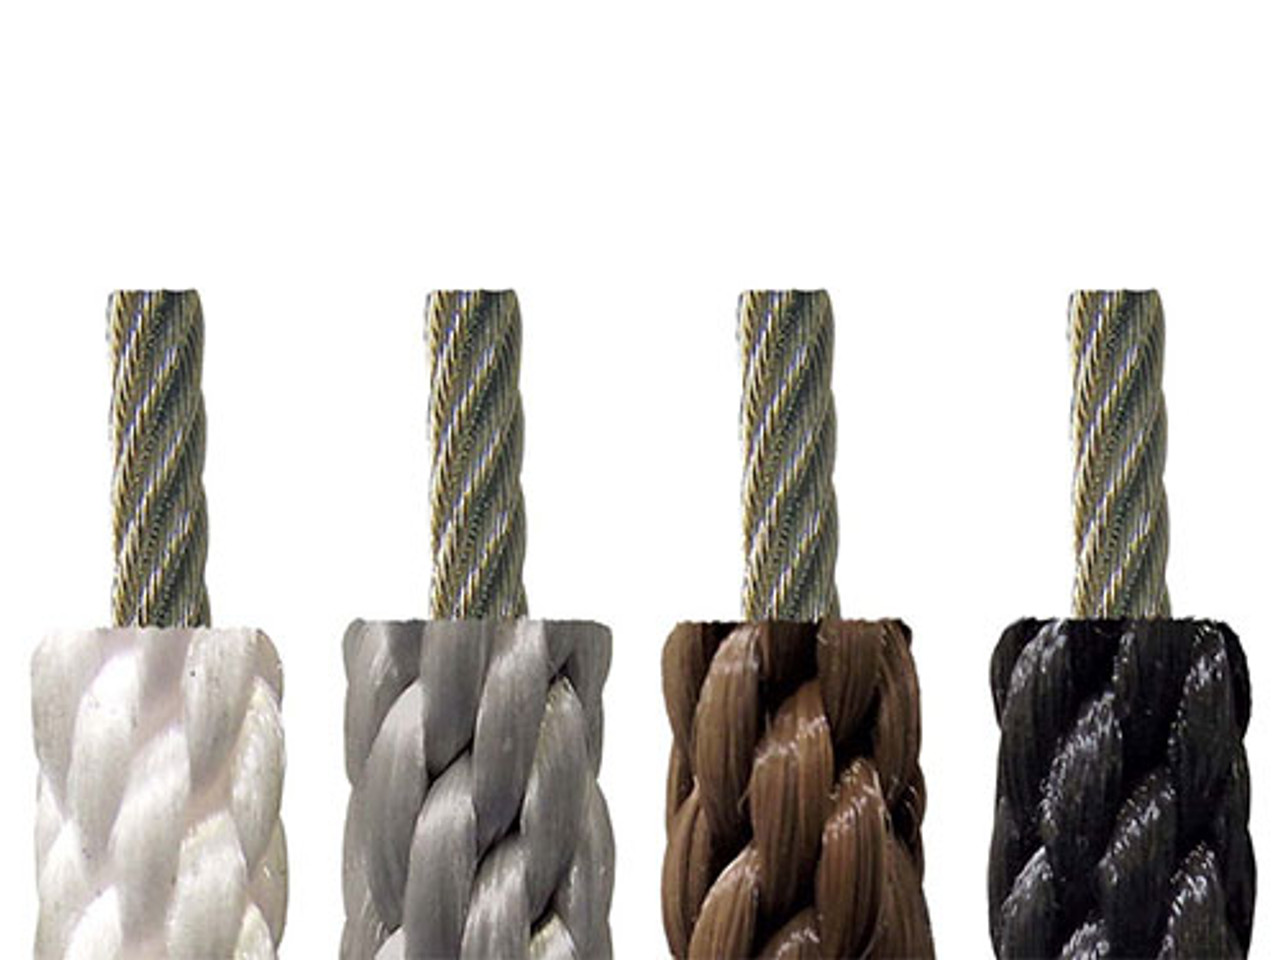 Amgate Wire Center Flagpole Rope 5/16 x 100 feet - Braided Polyester Line  with Steel Center Marine Grade Flag Pole Halyard Rope